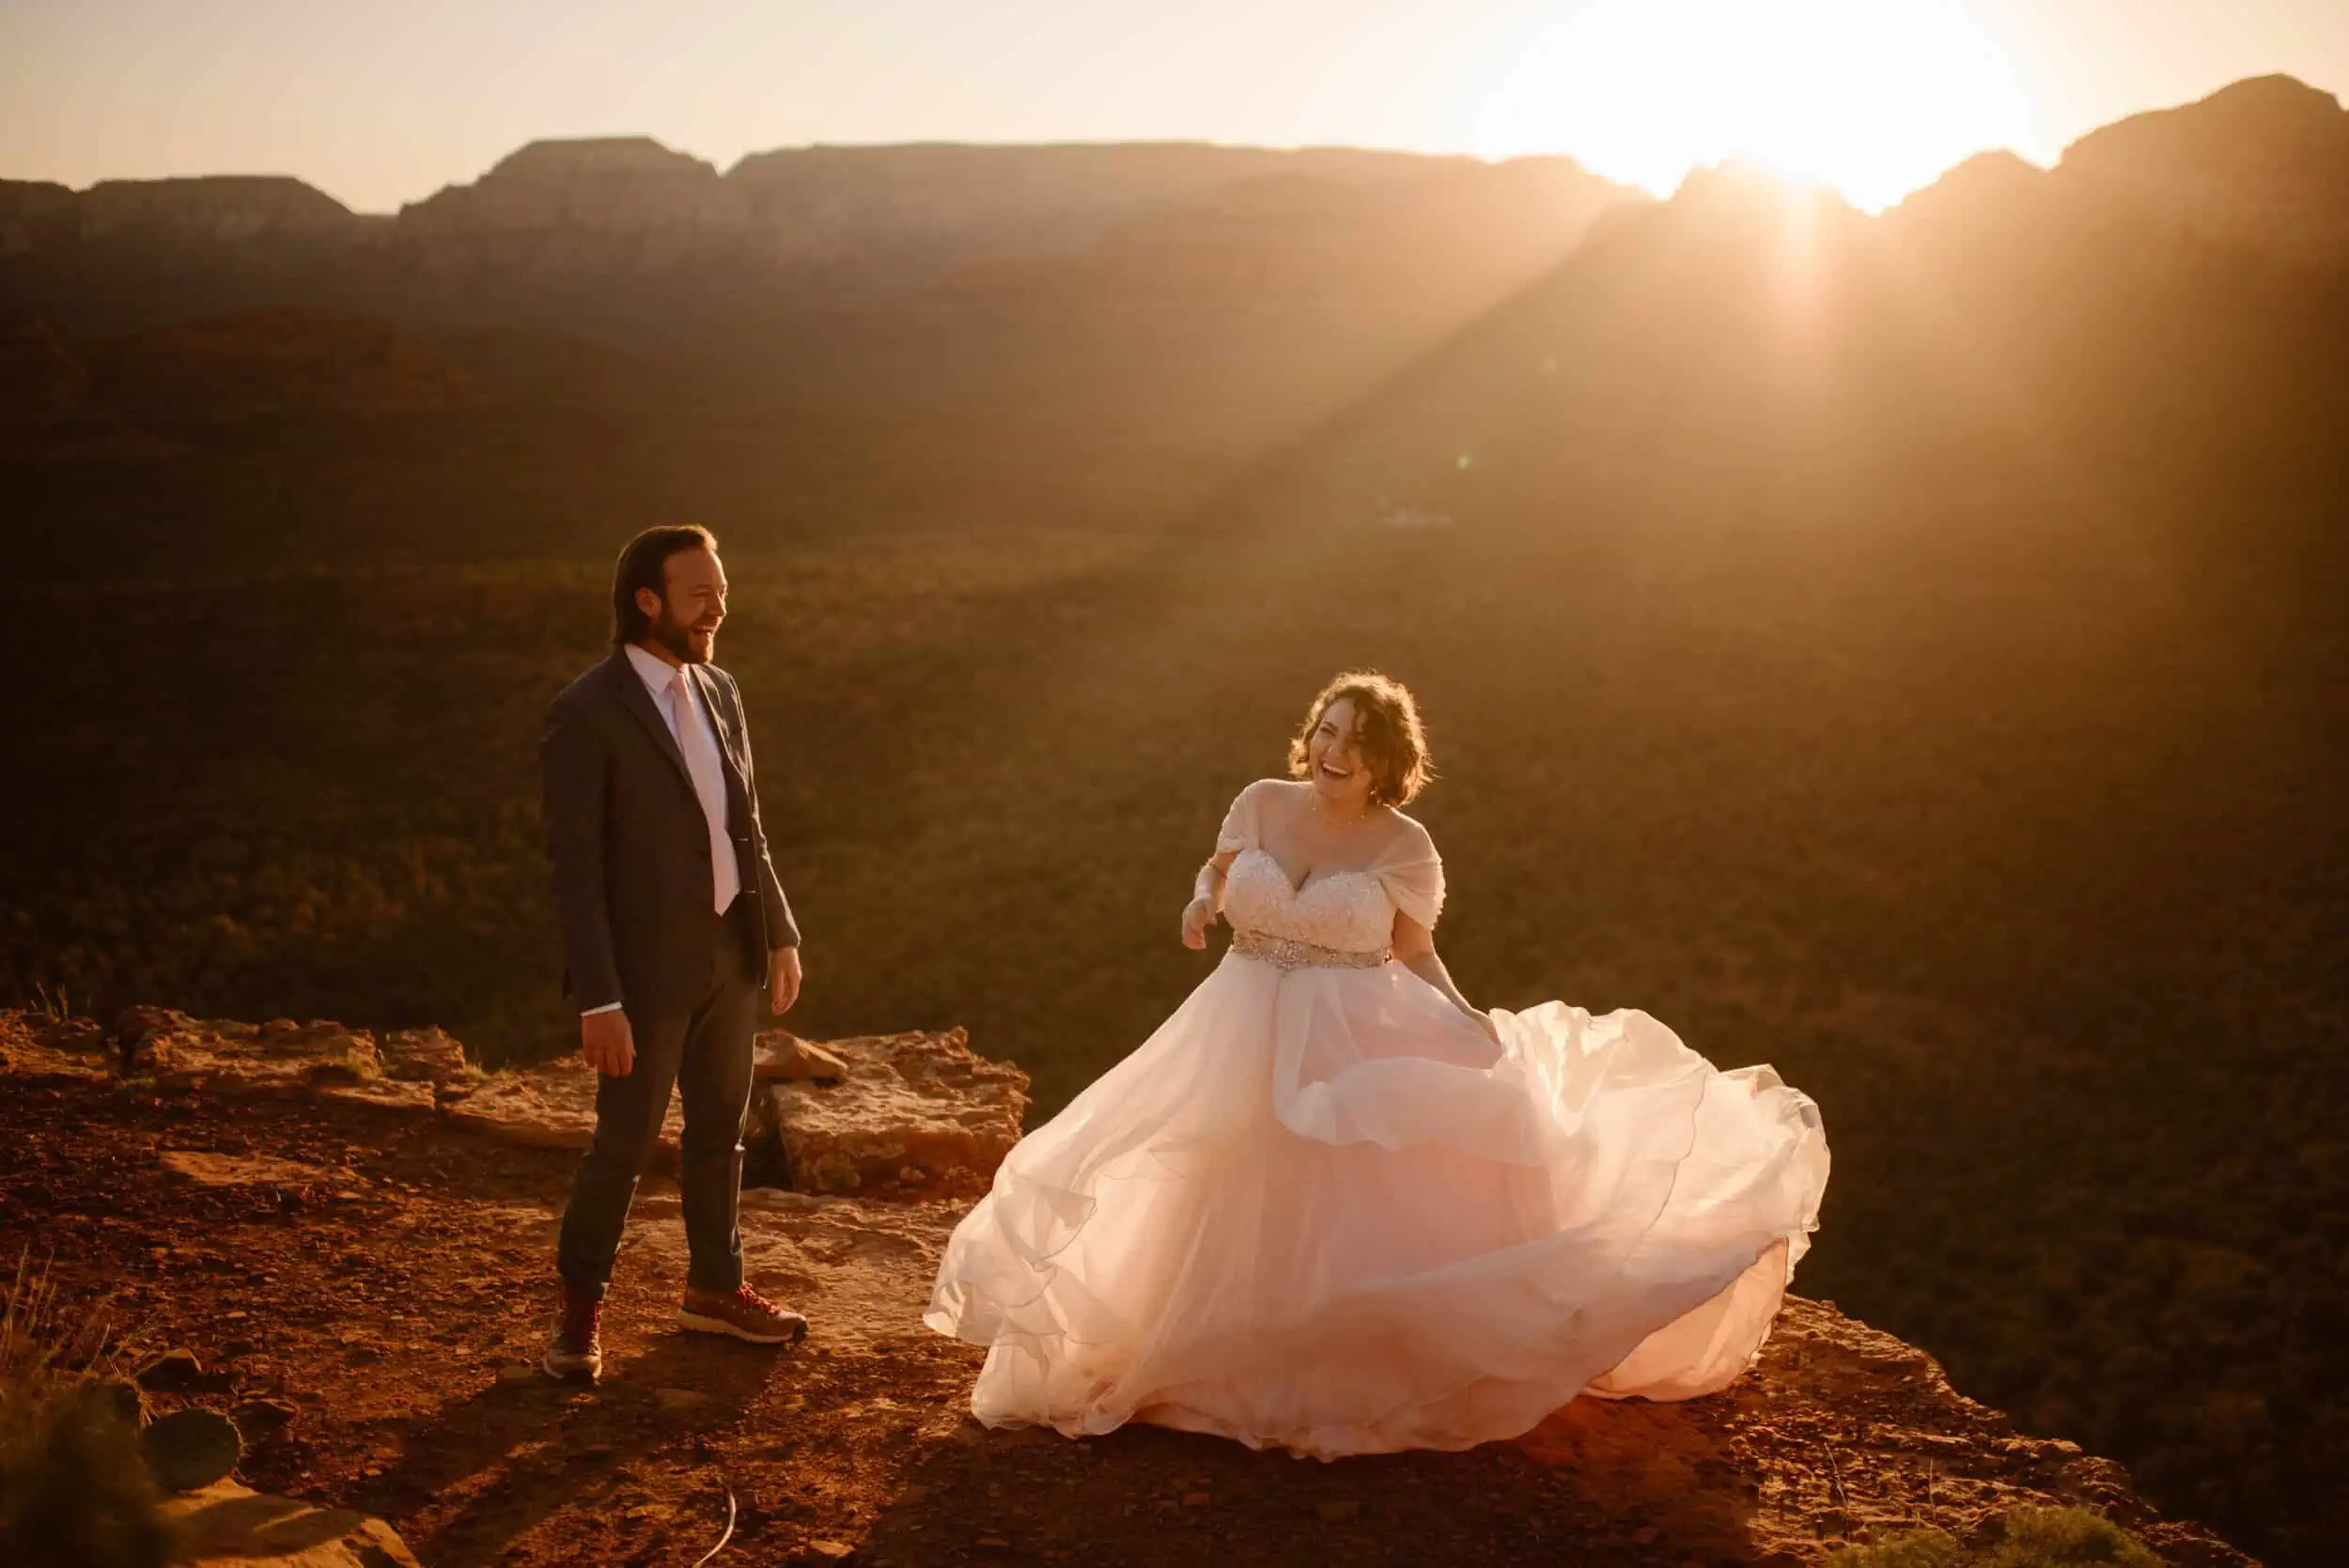 A groom and his pregnant bride stand together on the edge of the Sedona Red Rocks while the sun rises over the mountains.